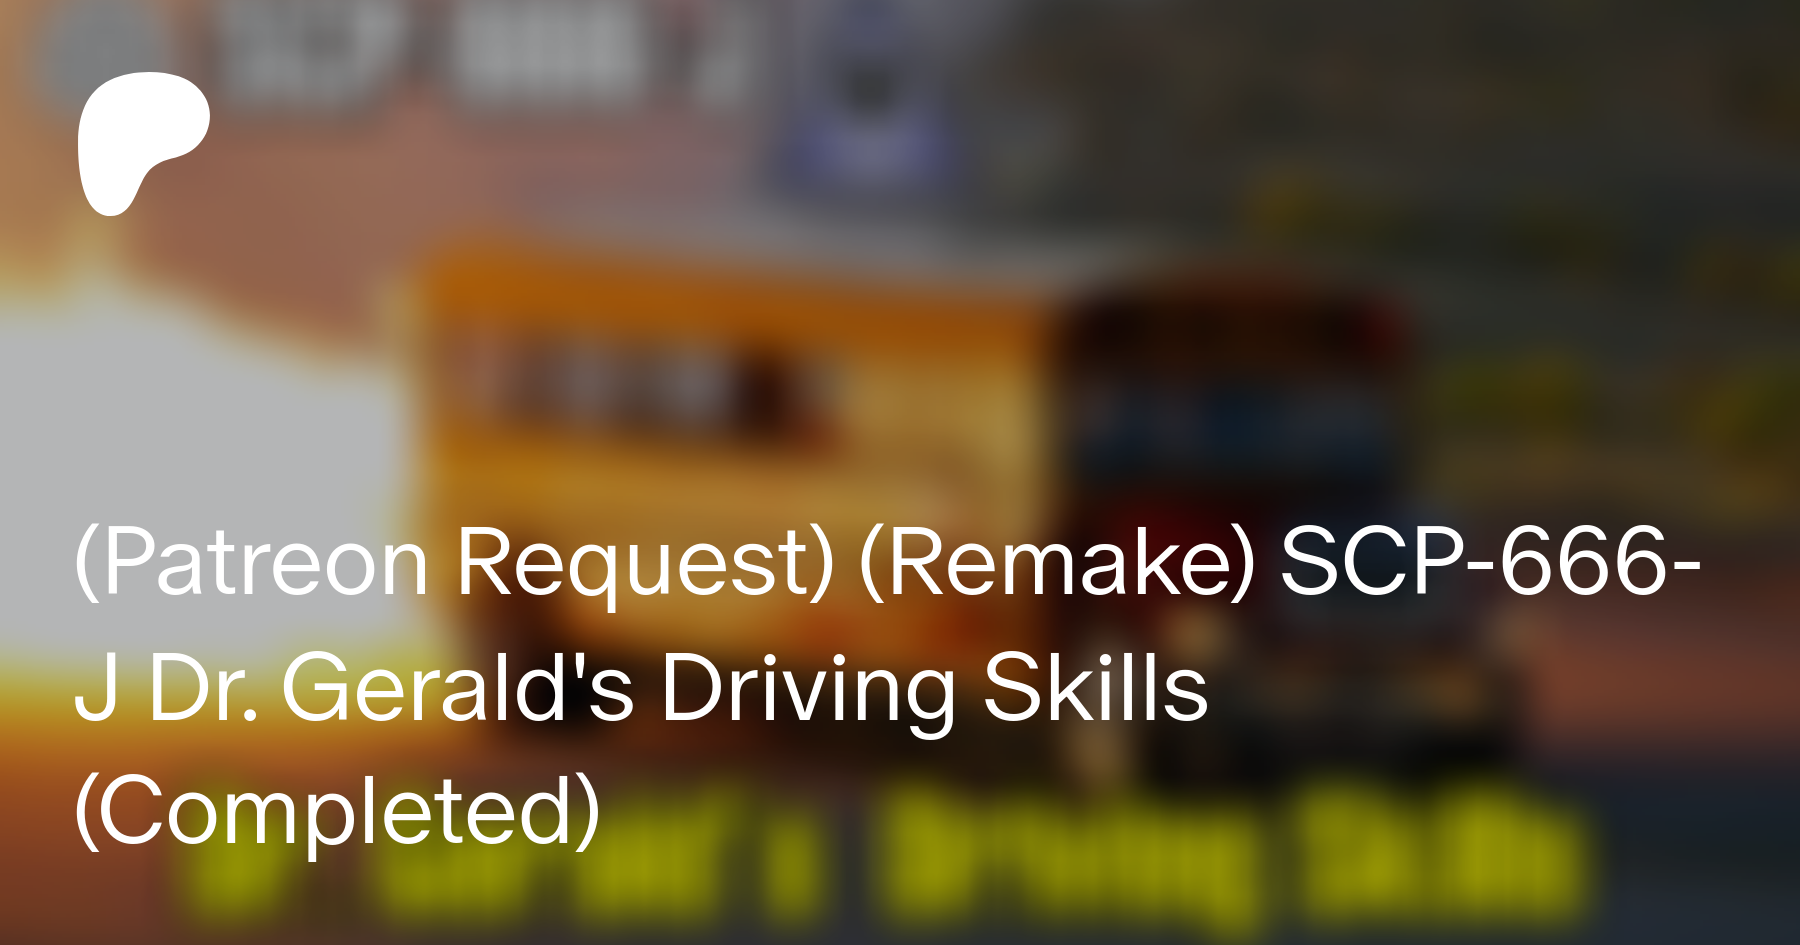 SCP-666-J Dr Gerald's Driving Skills, Wiki